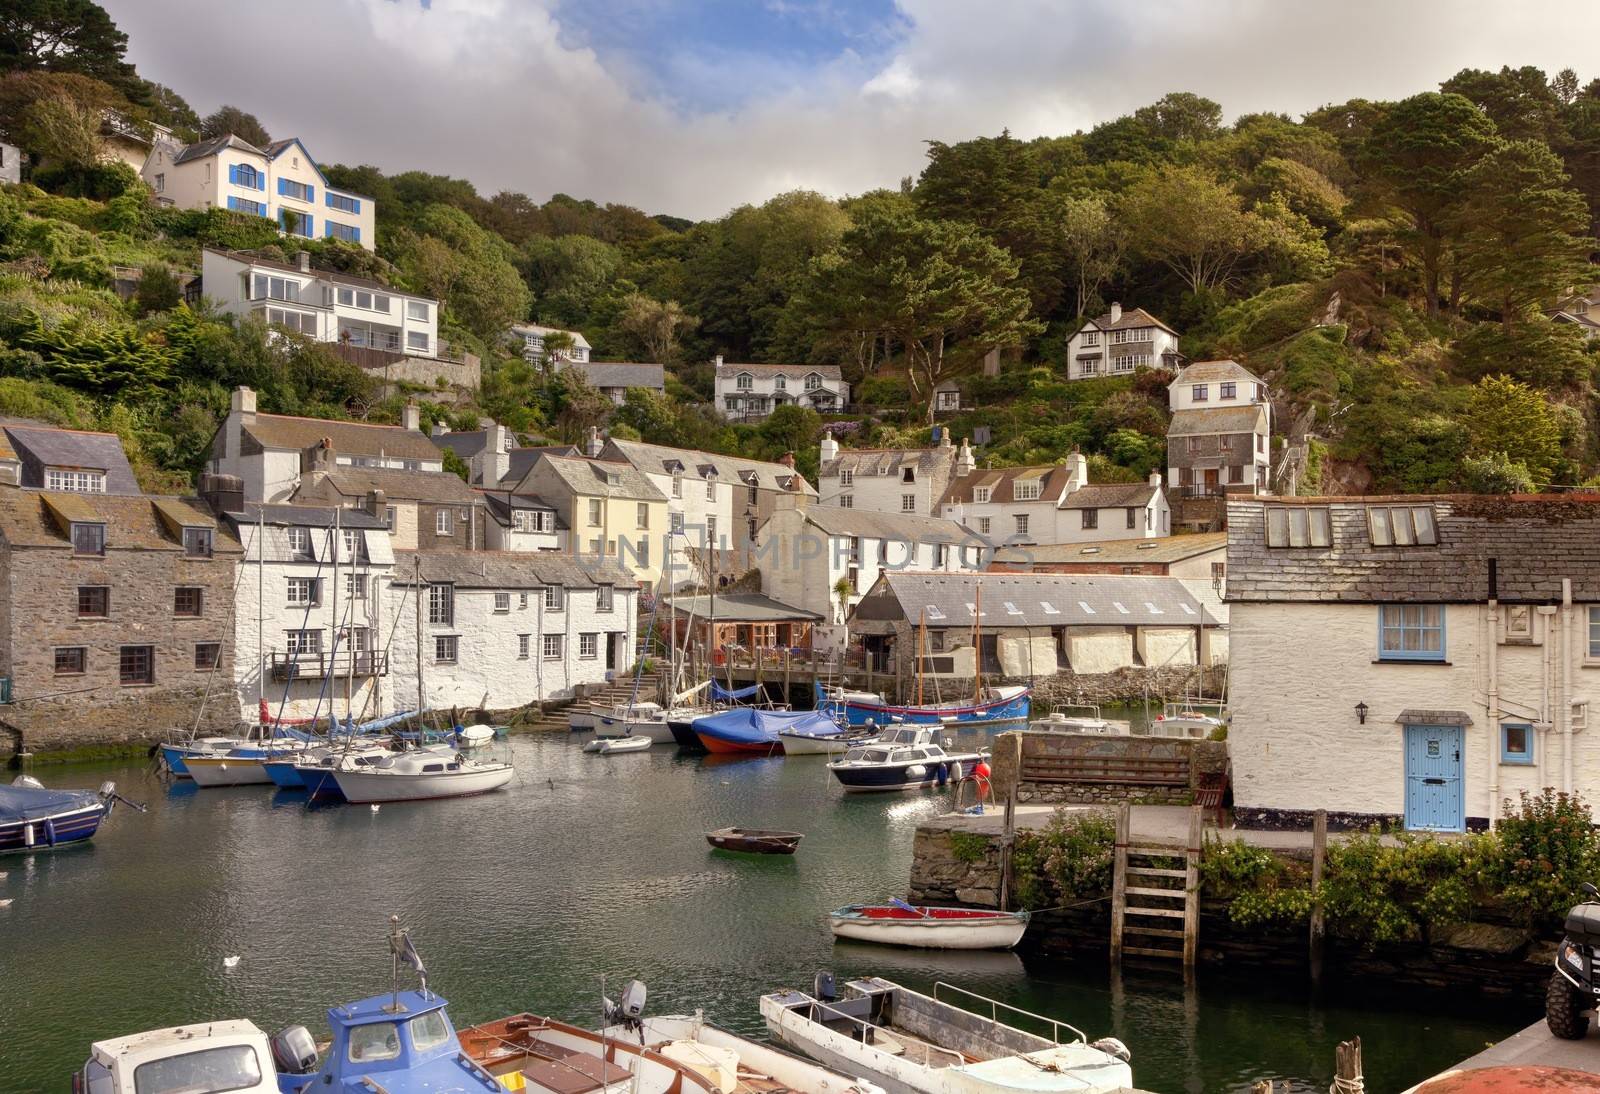 The pretty harbour at Polperro, Cornwall, England.